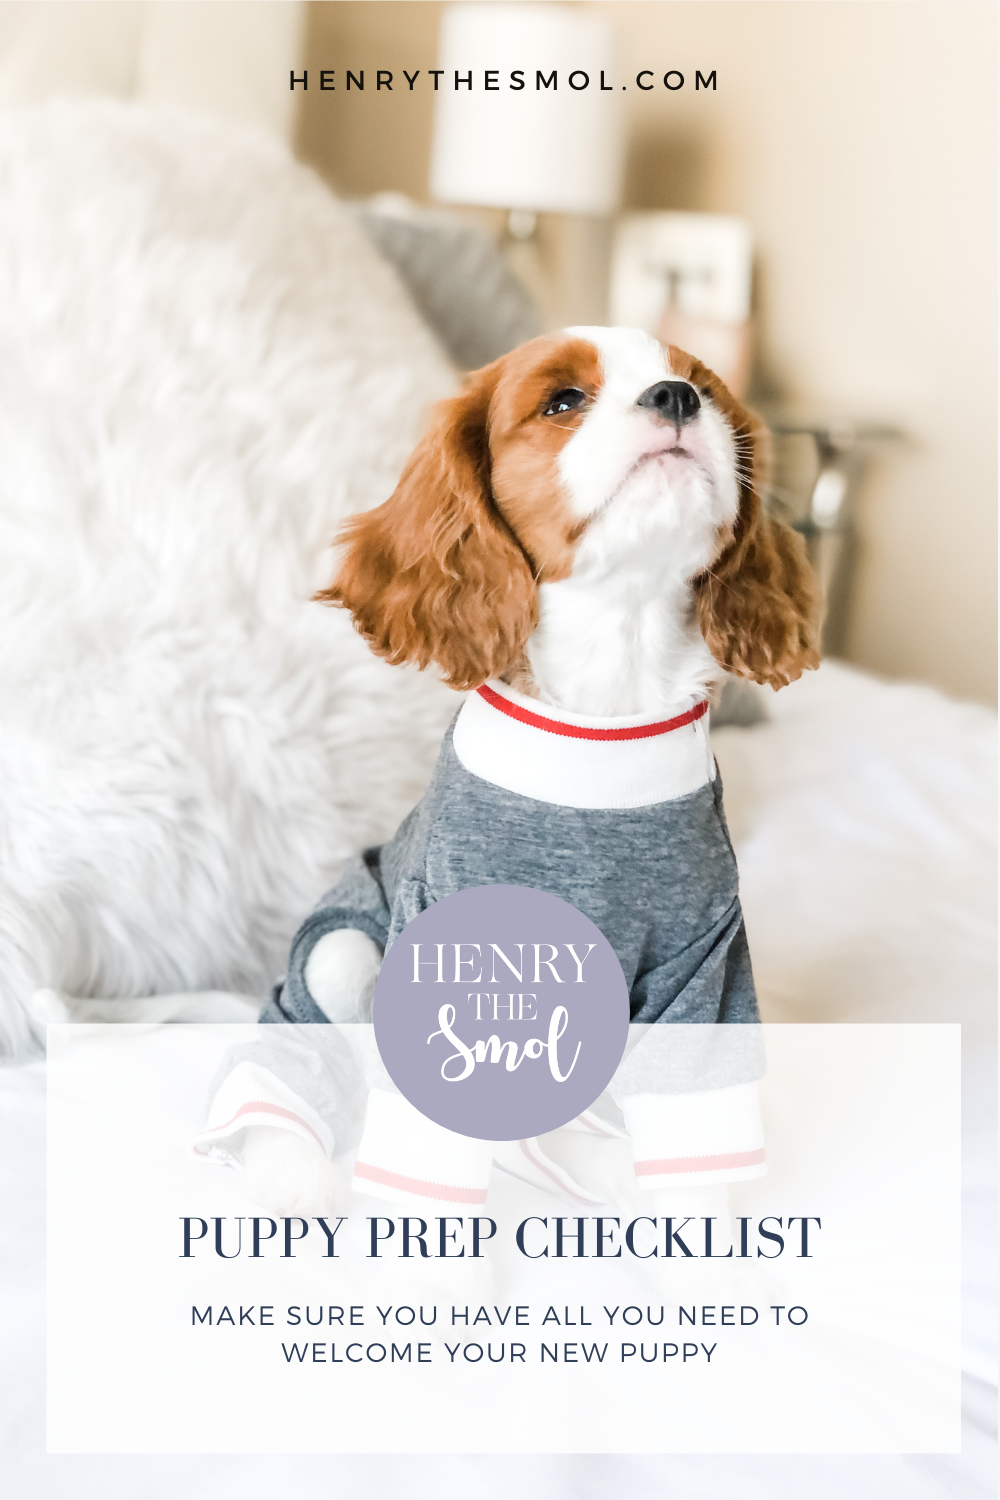 Preparing for Puppy Your Furbaby! Henry The Smol